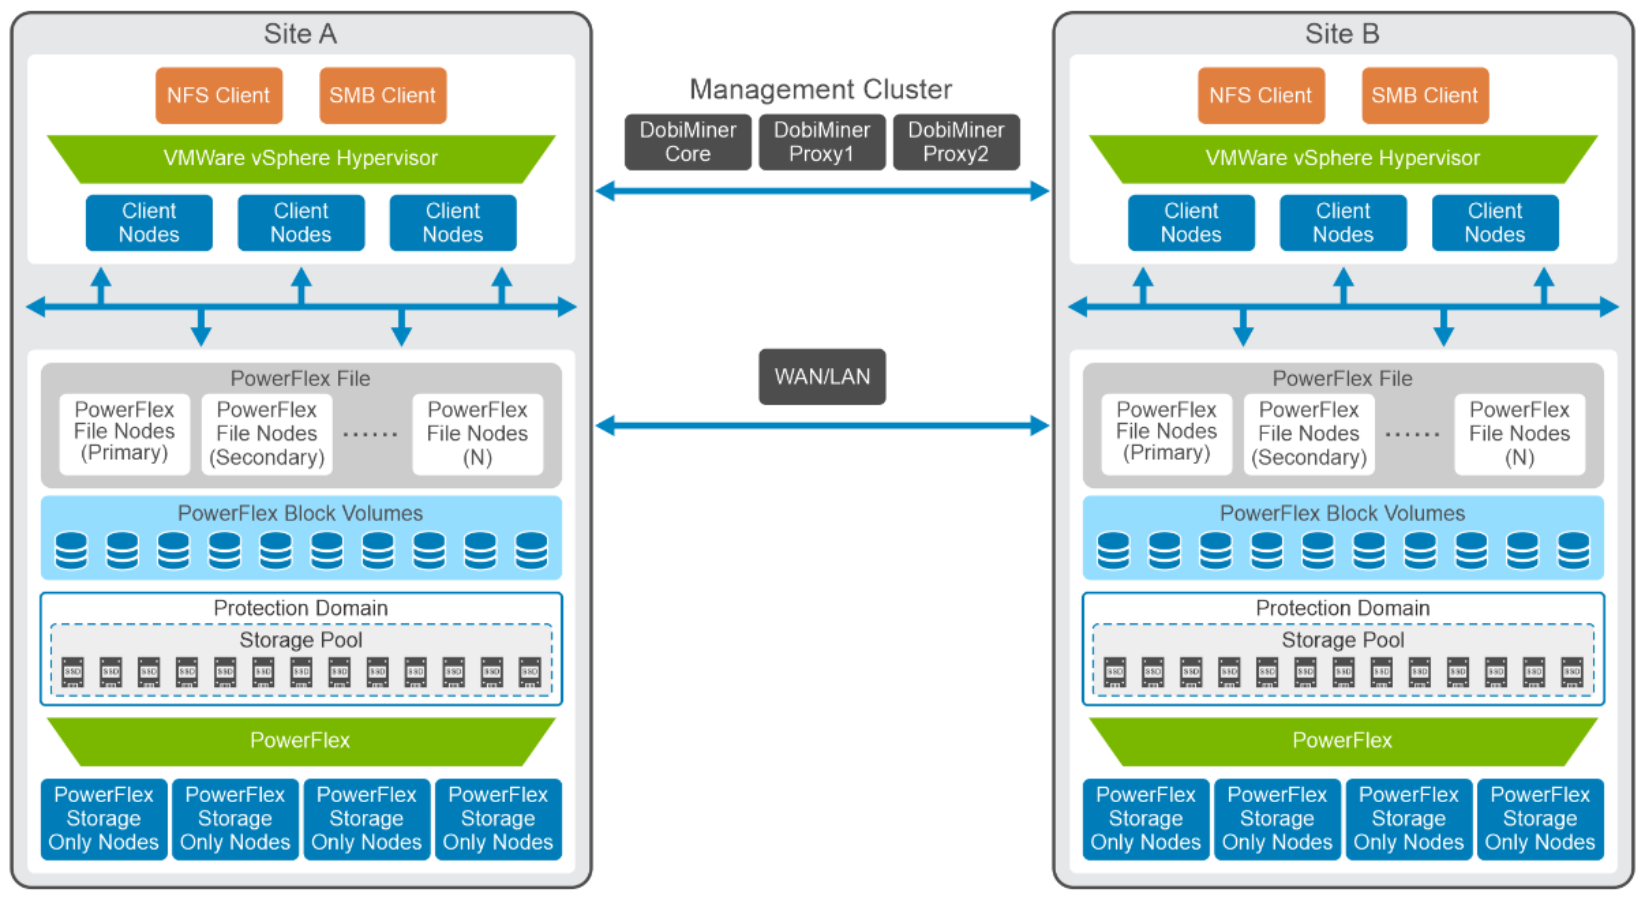 This image shows the logical architecture of the PowerFlex file clusters using two-layer deployment architecture.